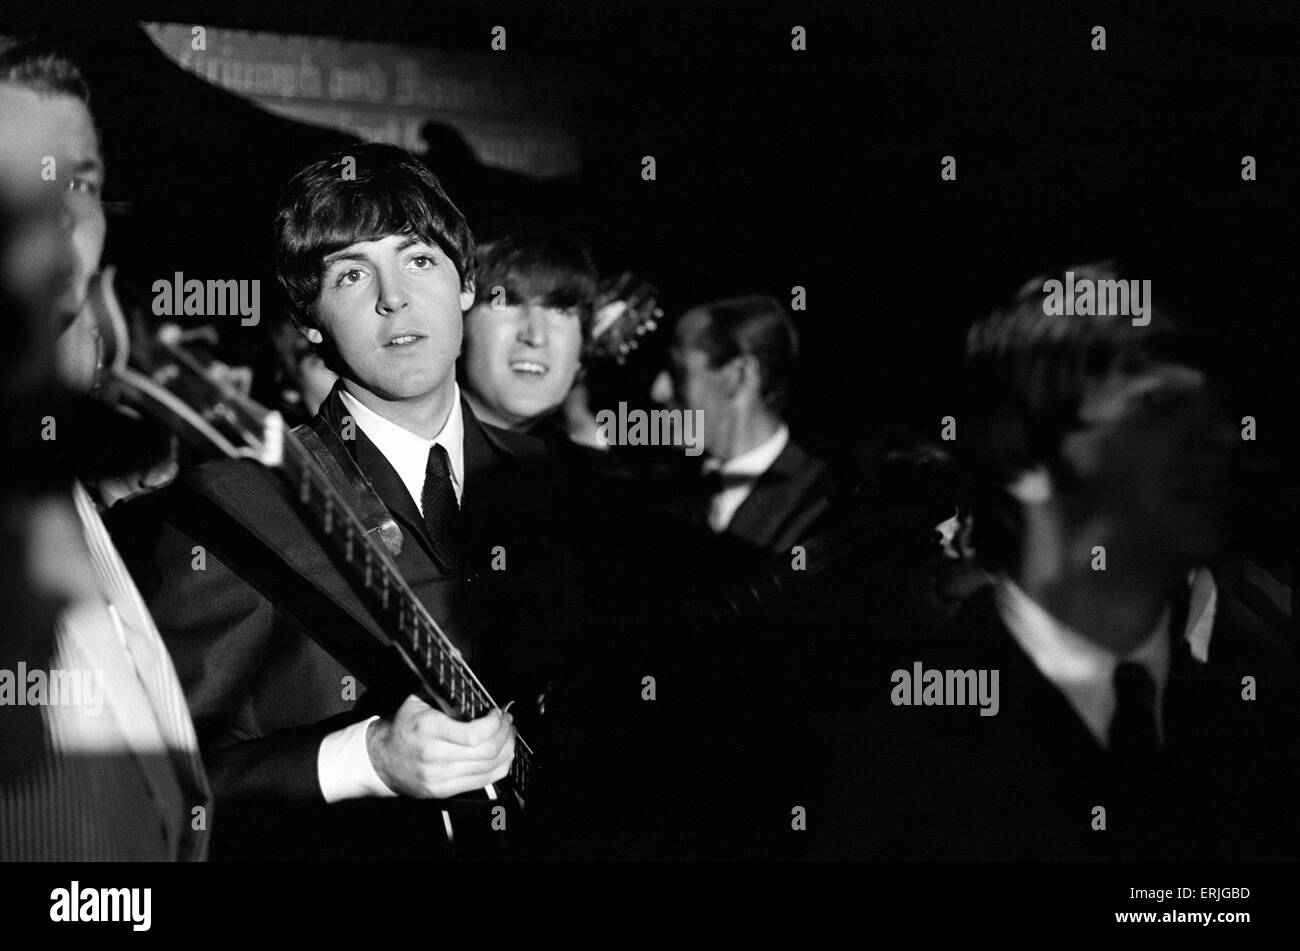 The Beatles 1964 American Tour Indianapolis, Indiana State Fair Coliseum. 3rd September 1964 Stock Photo